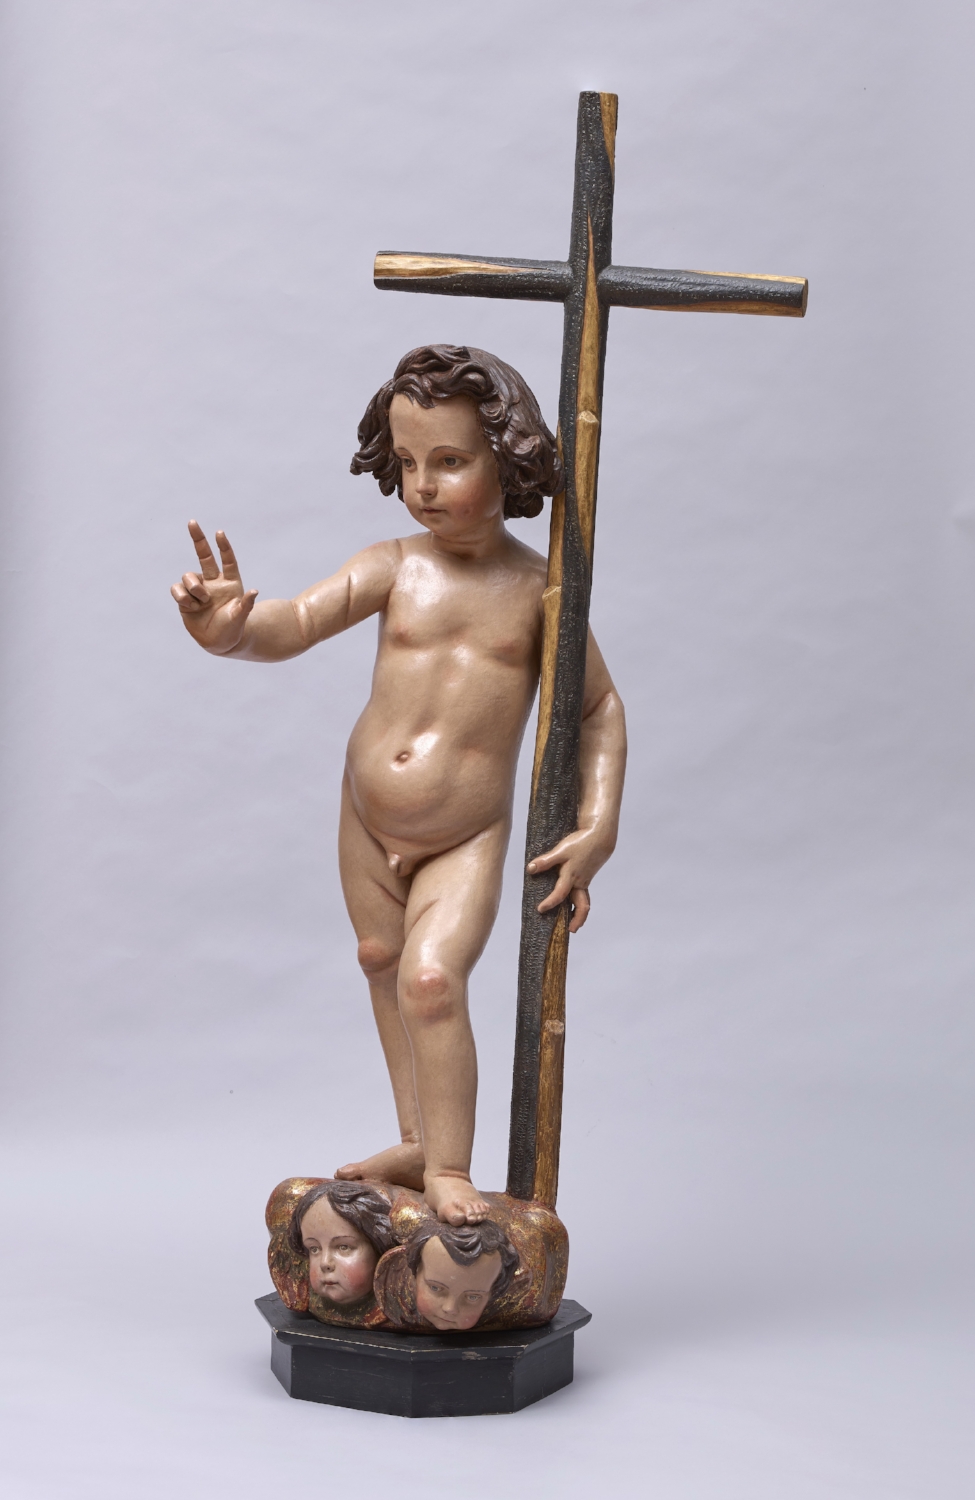 Francisco Dionisio de Ribas, Infant Jesus in triumph - View from the Right 2